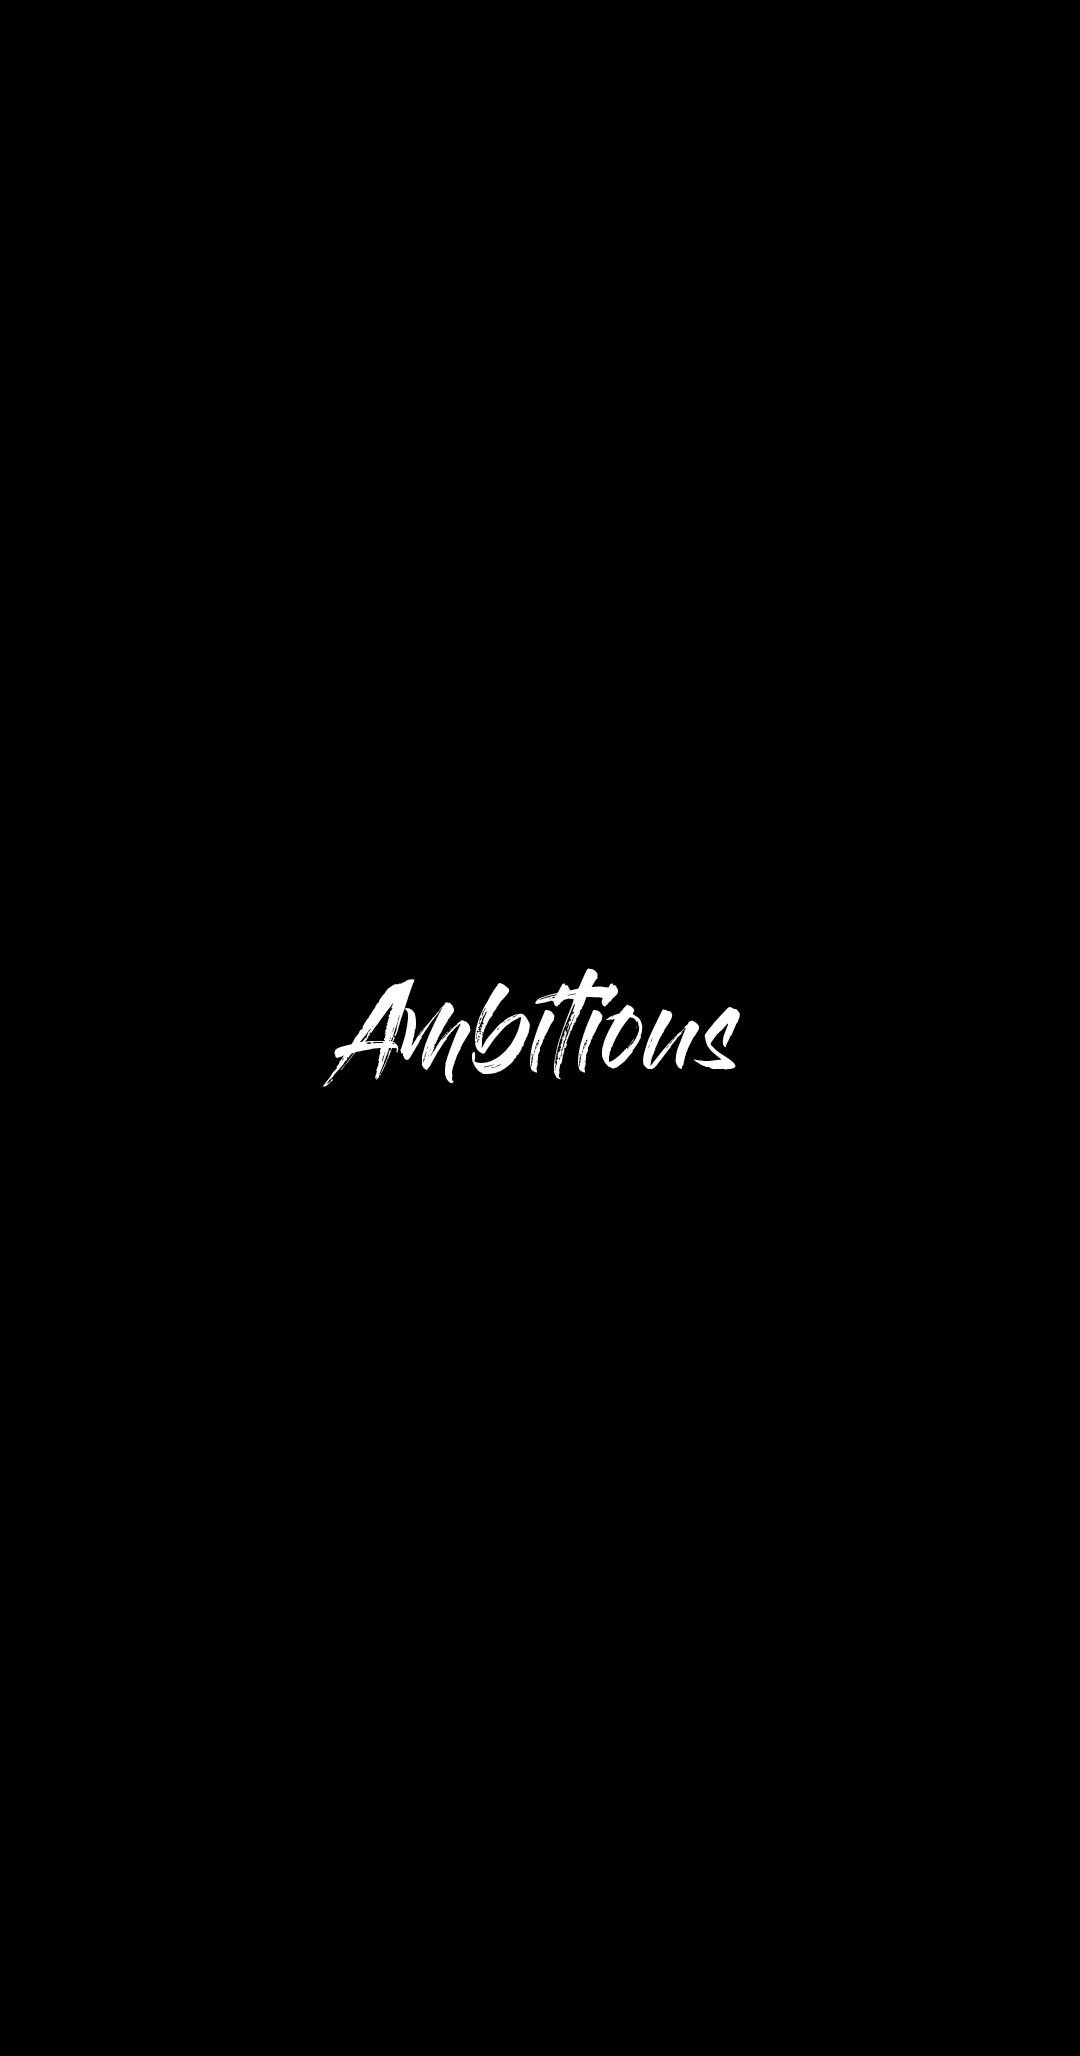 Ambitions Word With Black Background